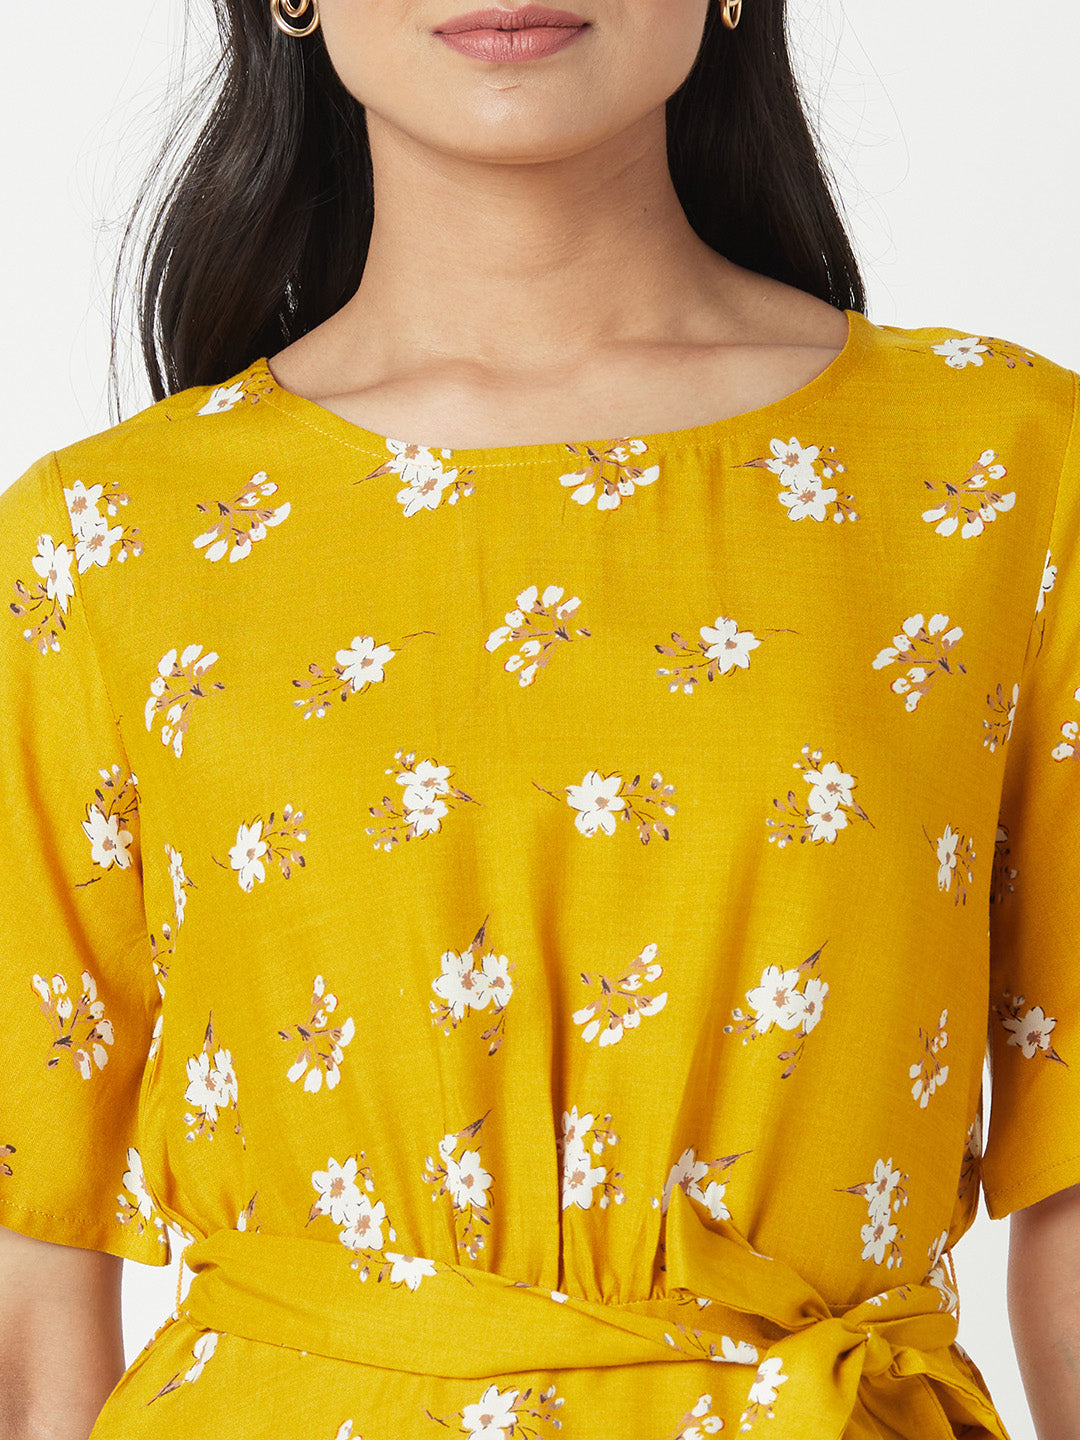 Mustard Round Neck Woven Cotton Rayon Top With Belt